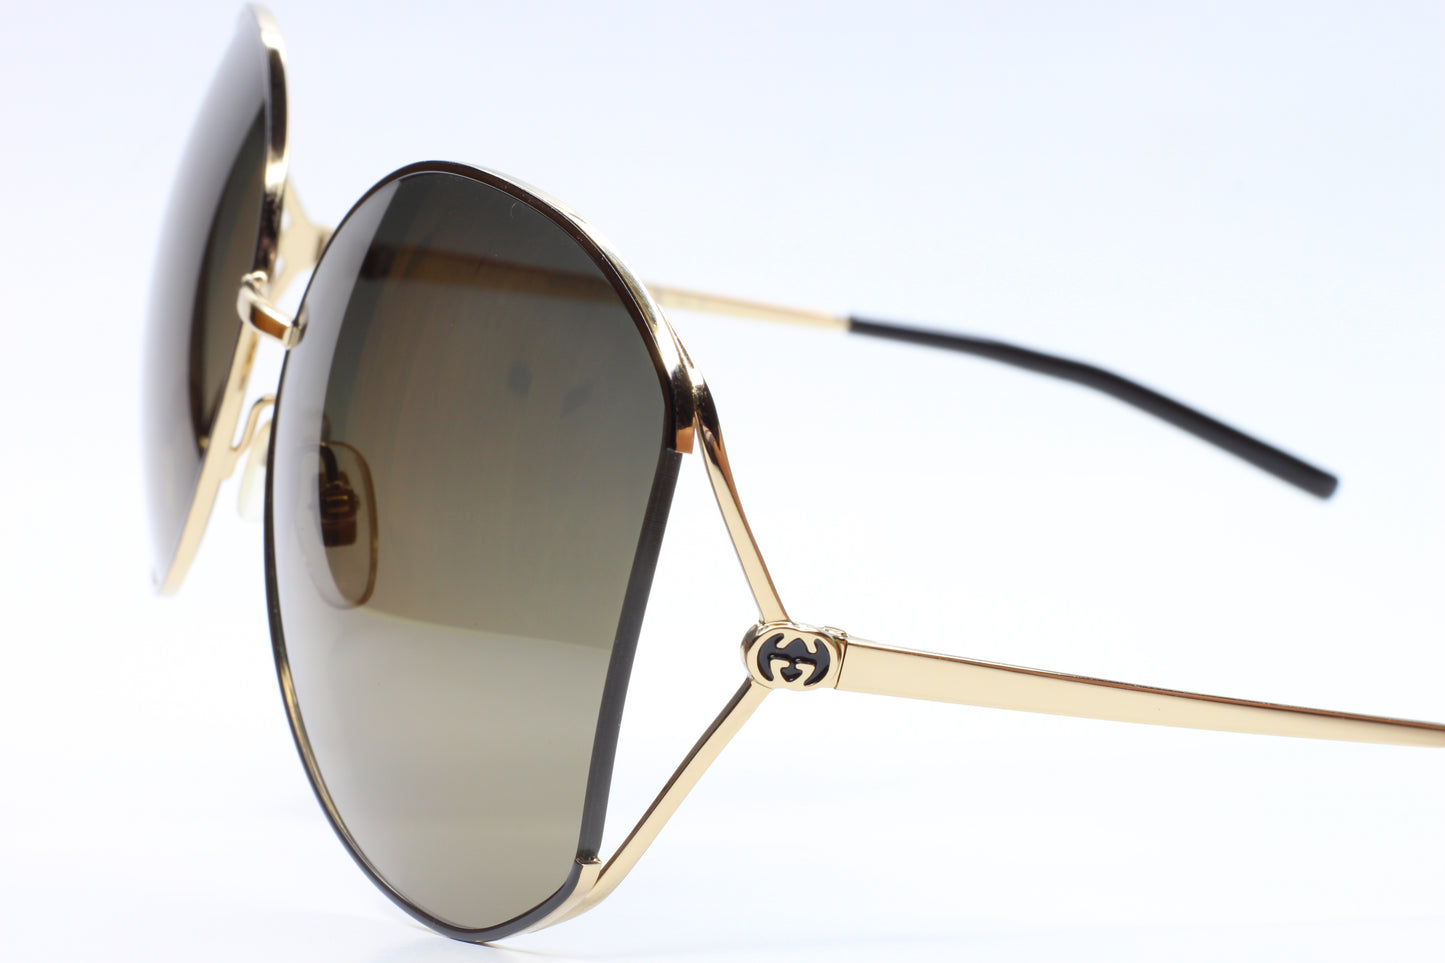 Gucci GG4208/S 4Z6R4 Gold Metal Luxury Italy Sunglasses